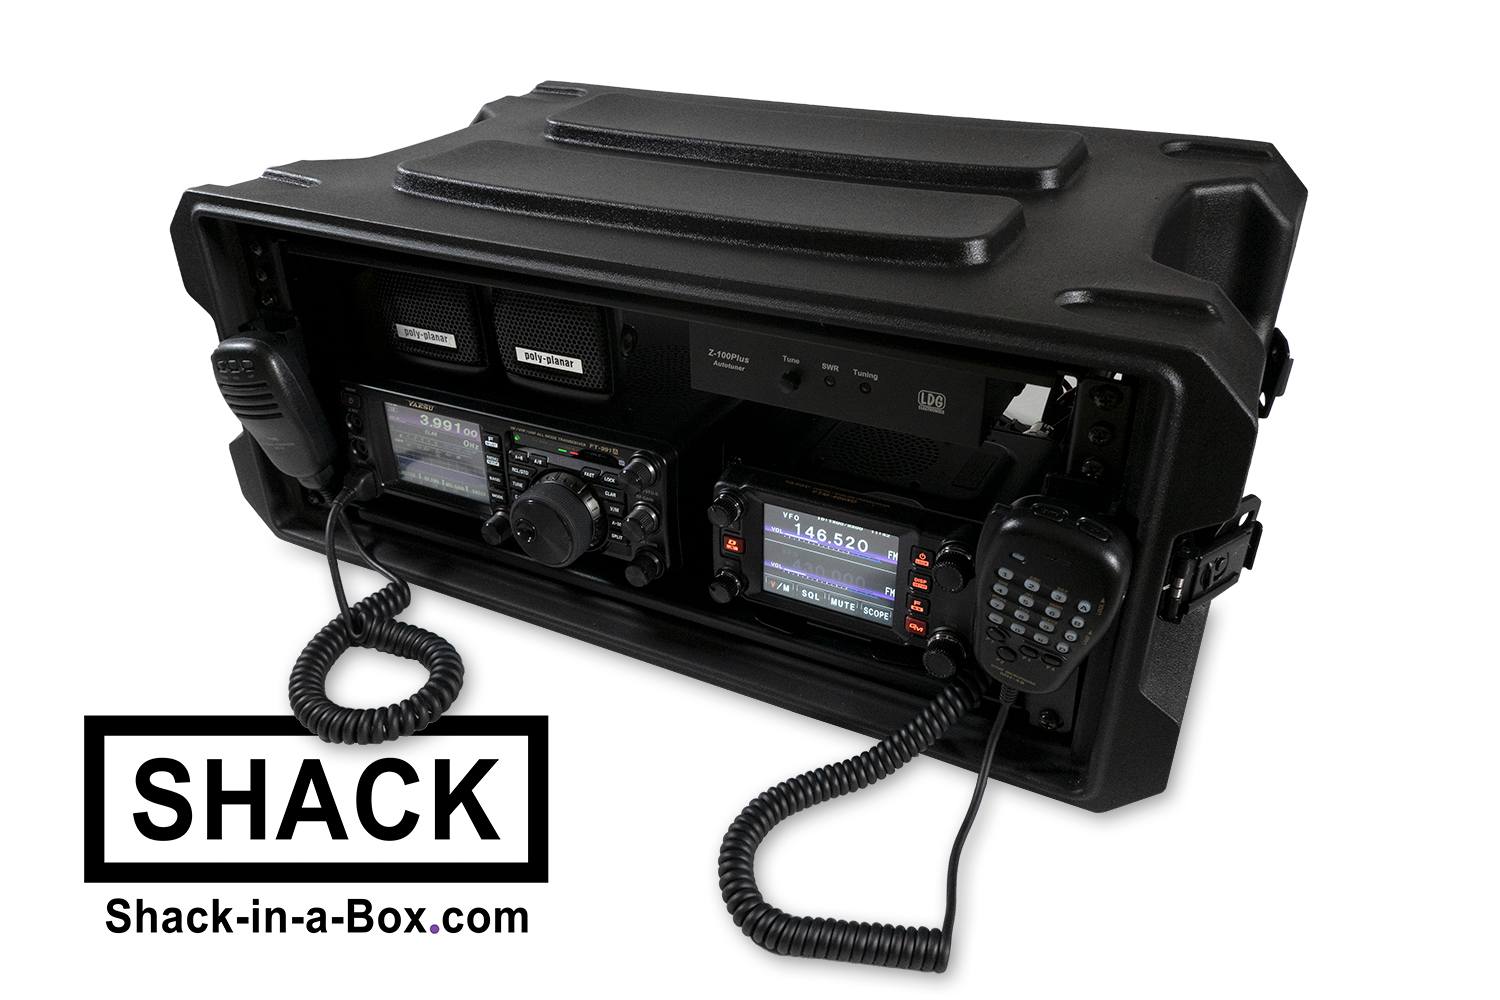 Shack-in-a-Box HF/VHF/UHF All-in-One with Yaesu FT-991A and FTM400XDR